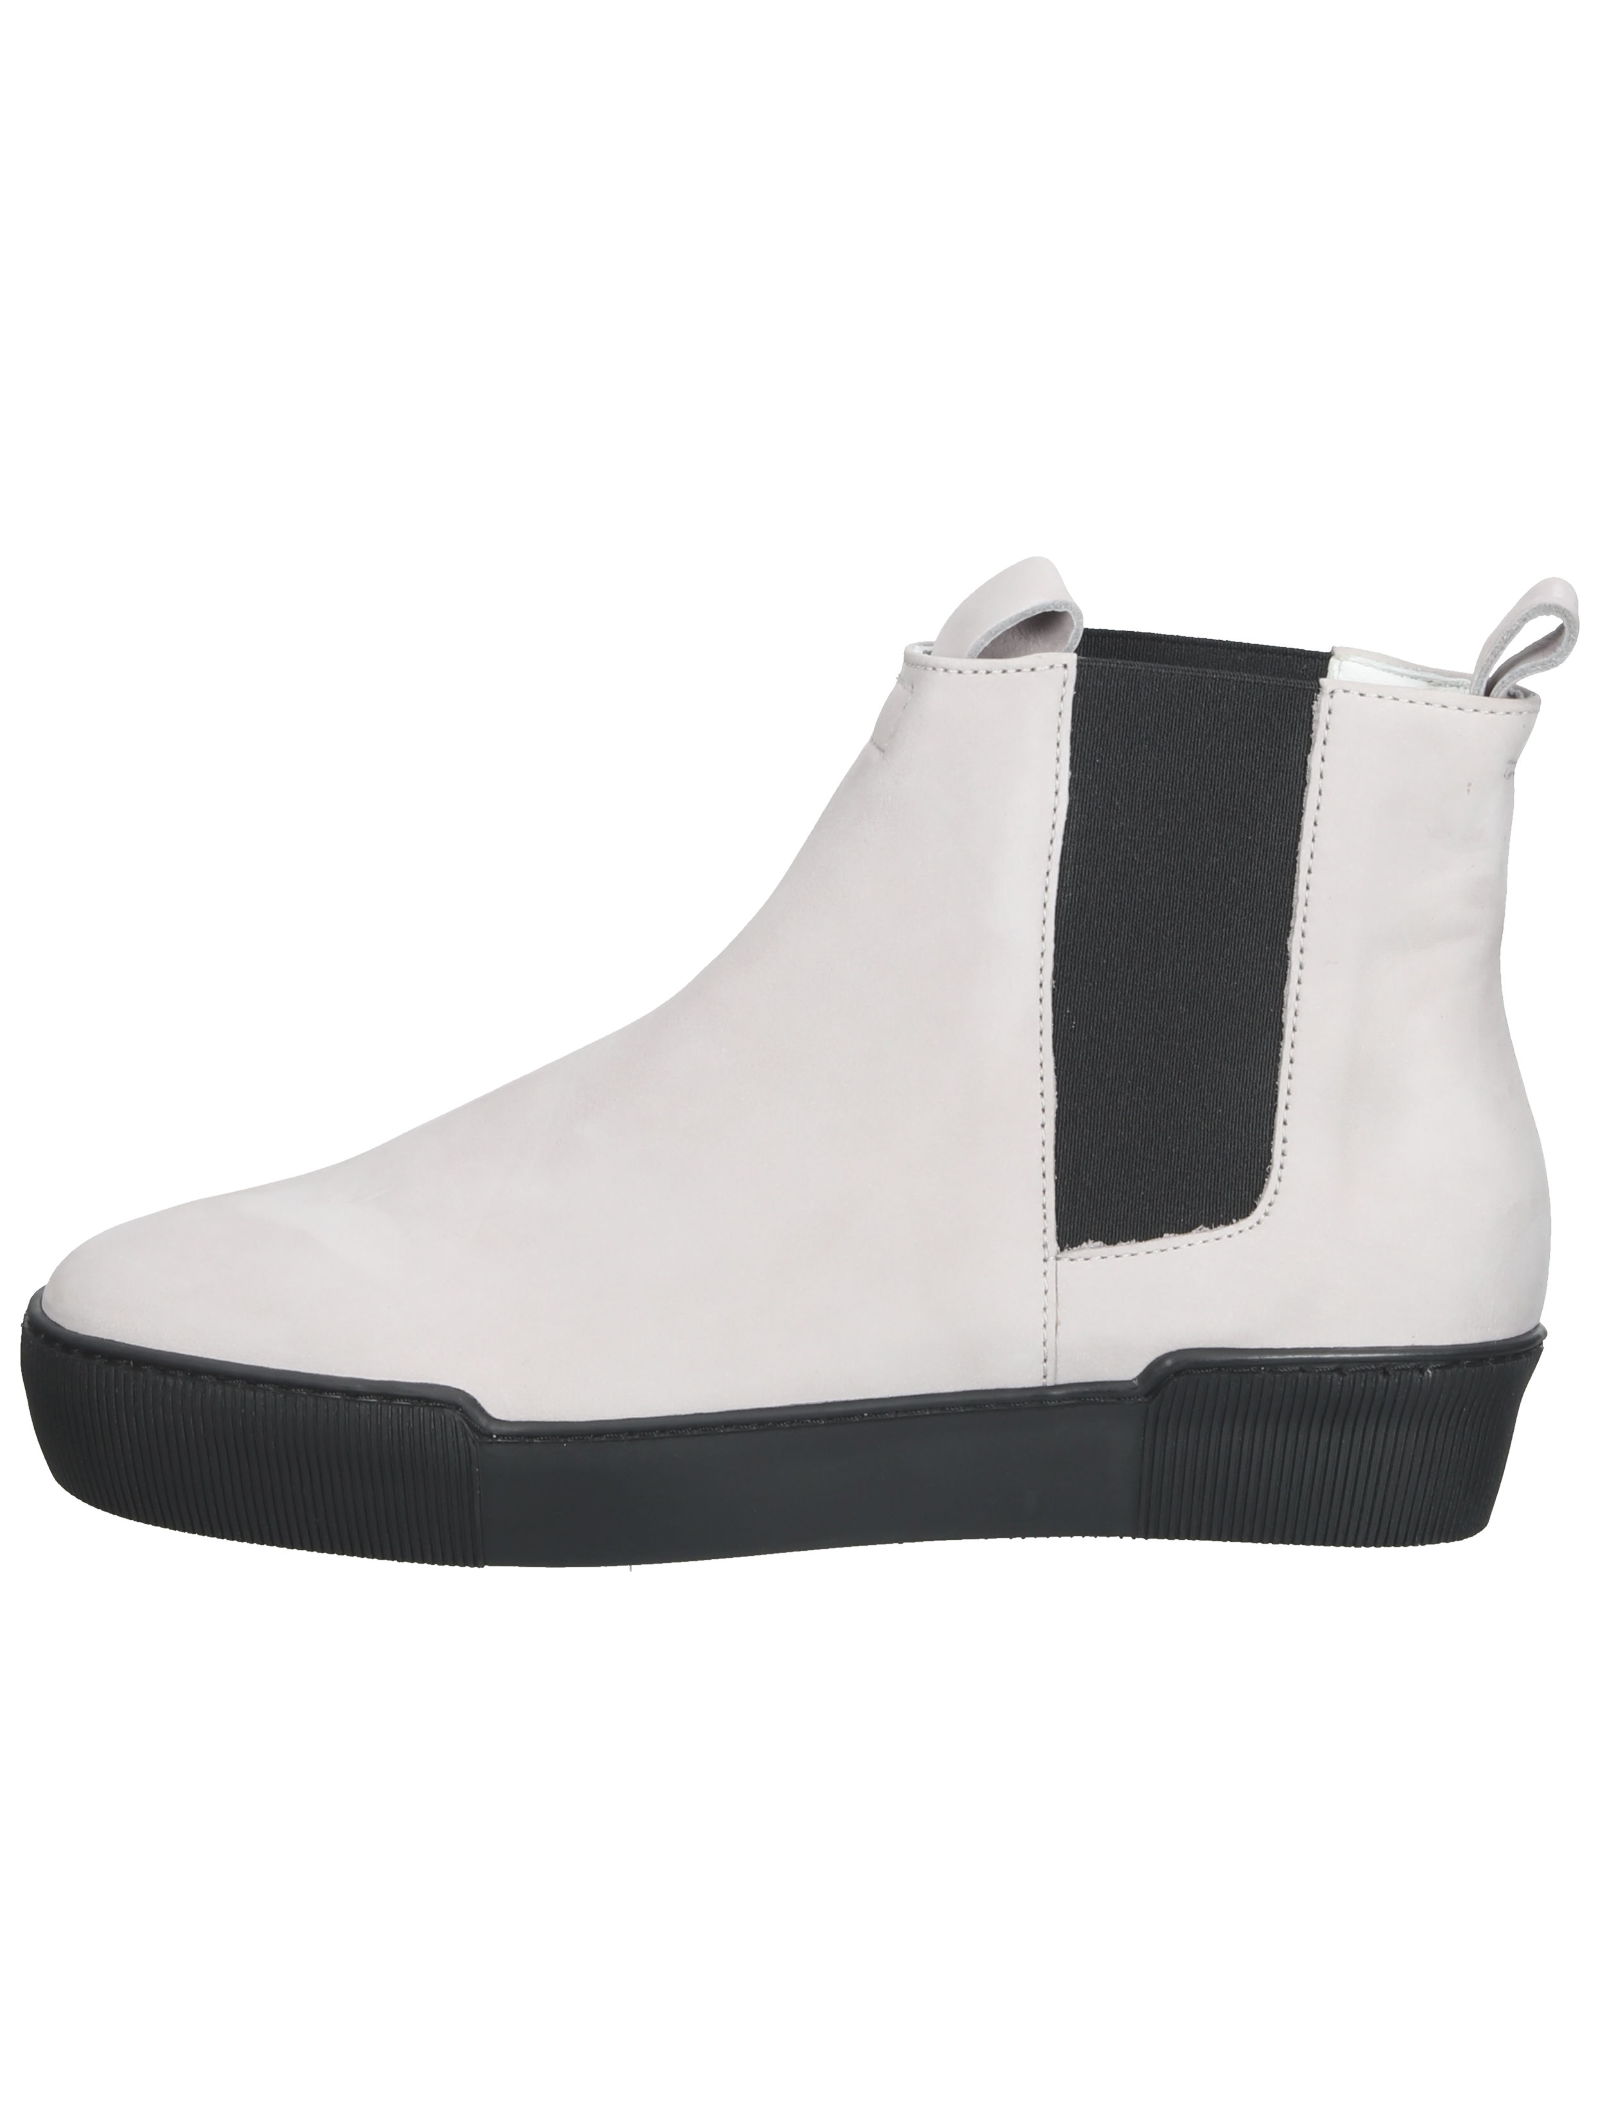 Högl Chelsea Boots in Weiß 